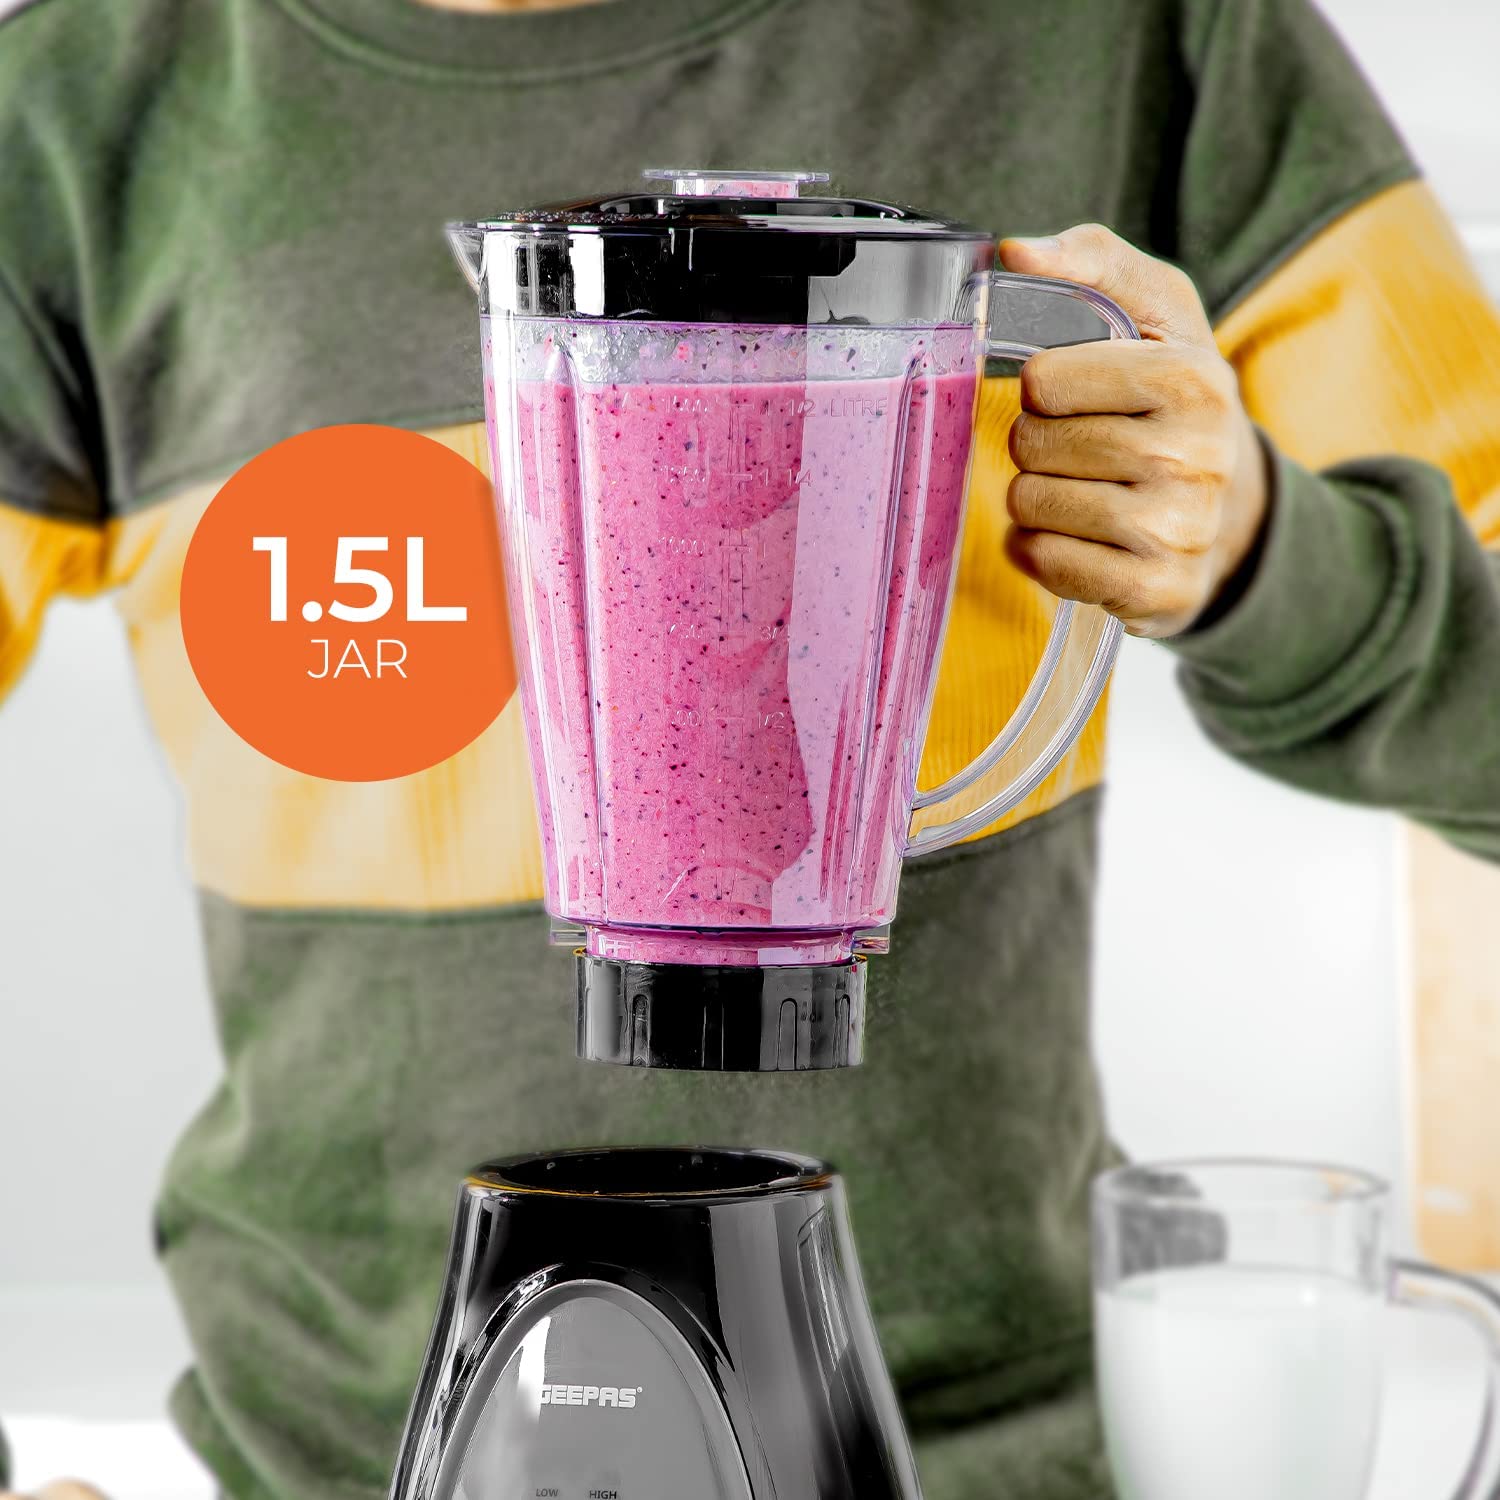 3 in 1 Food Jug Blender with 1.5L Jar, 6 Speed Control with Pulse